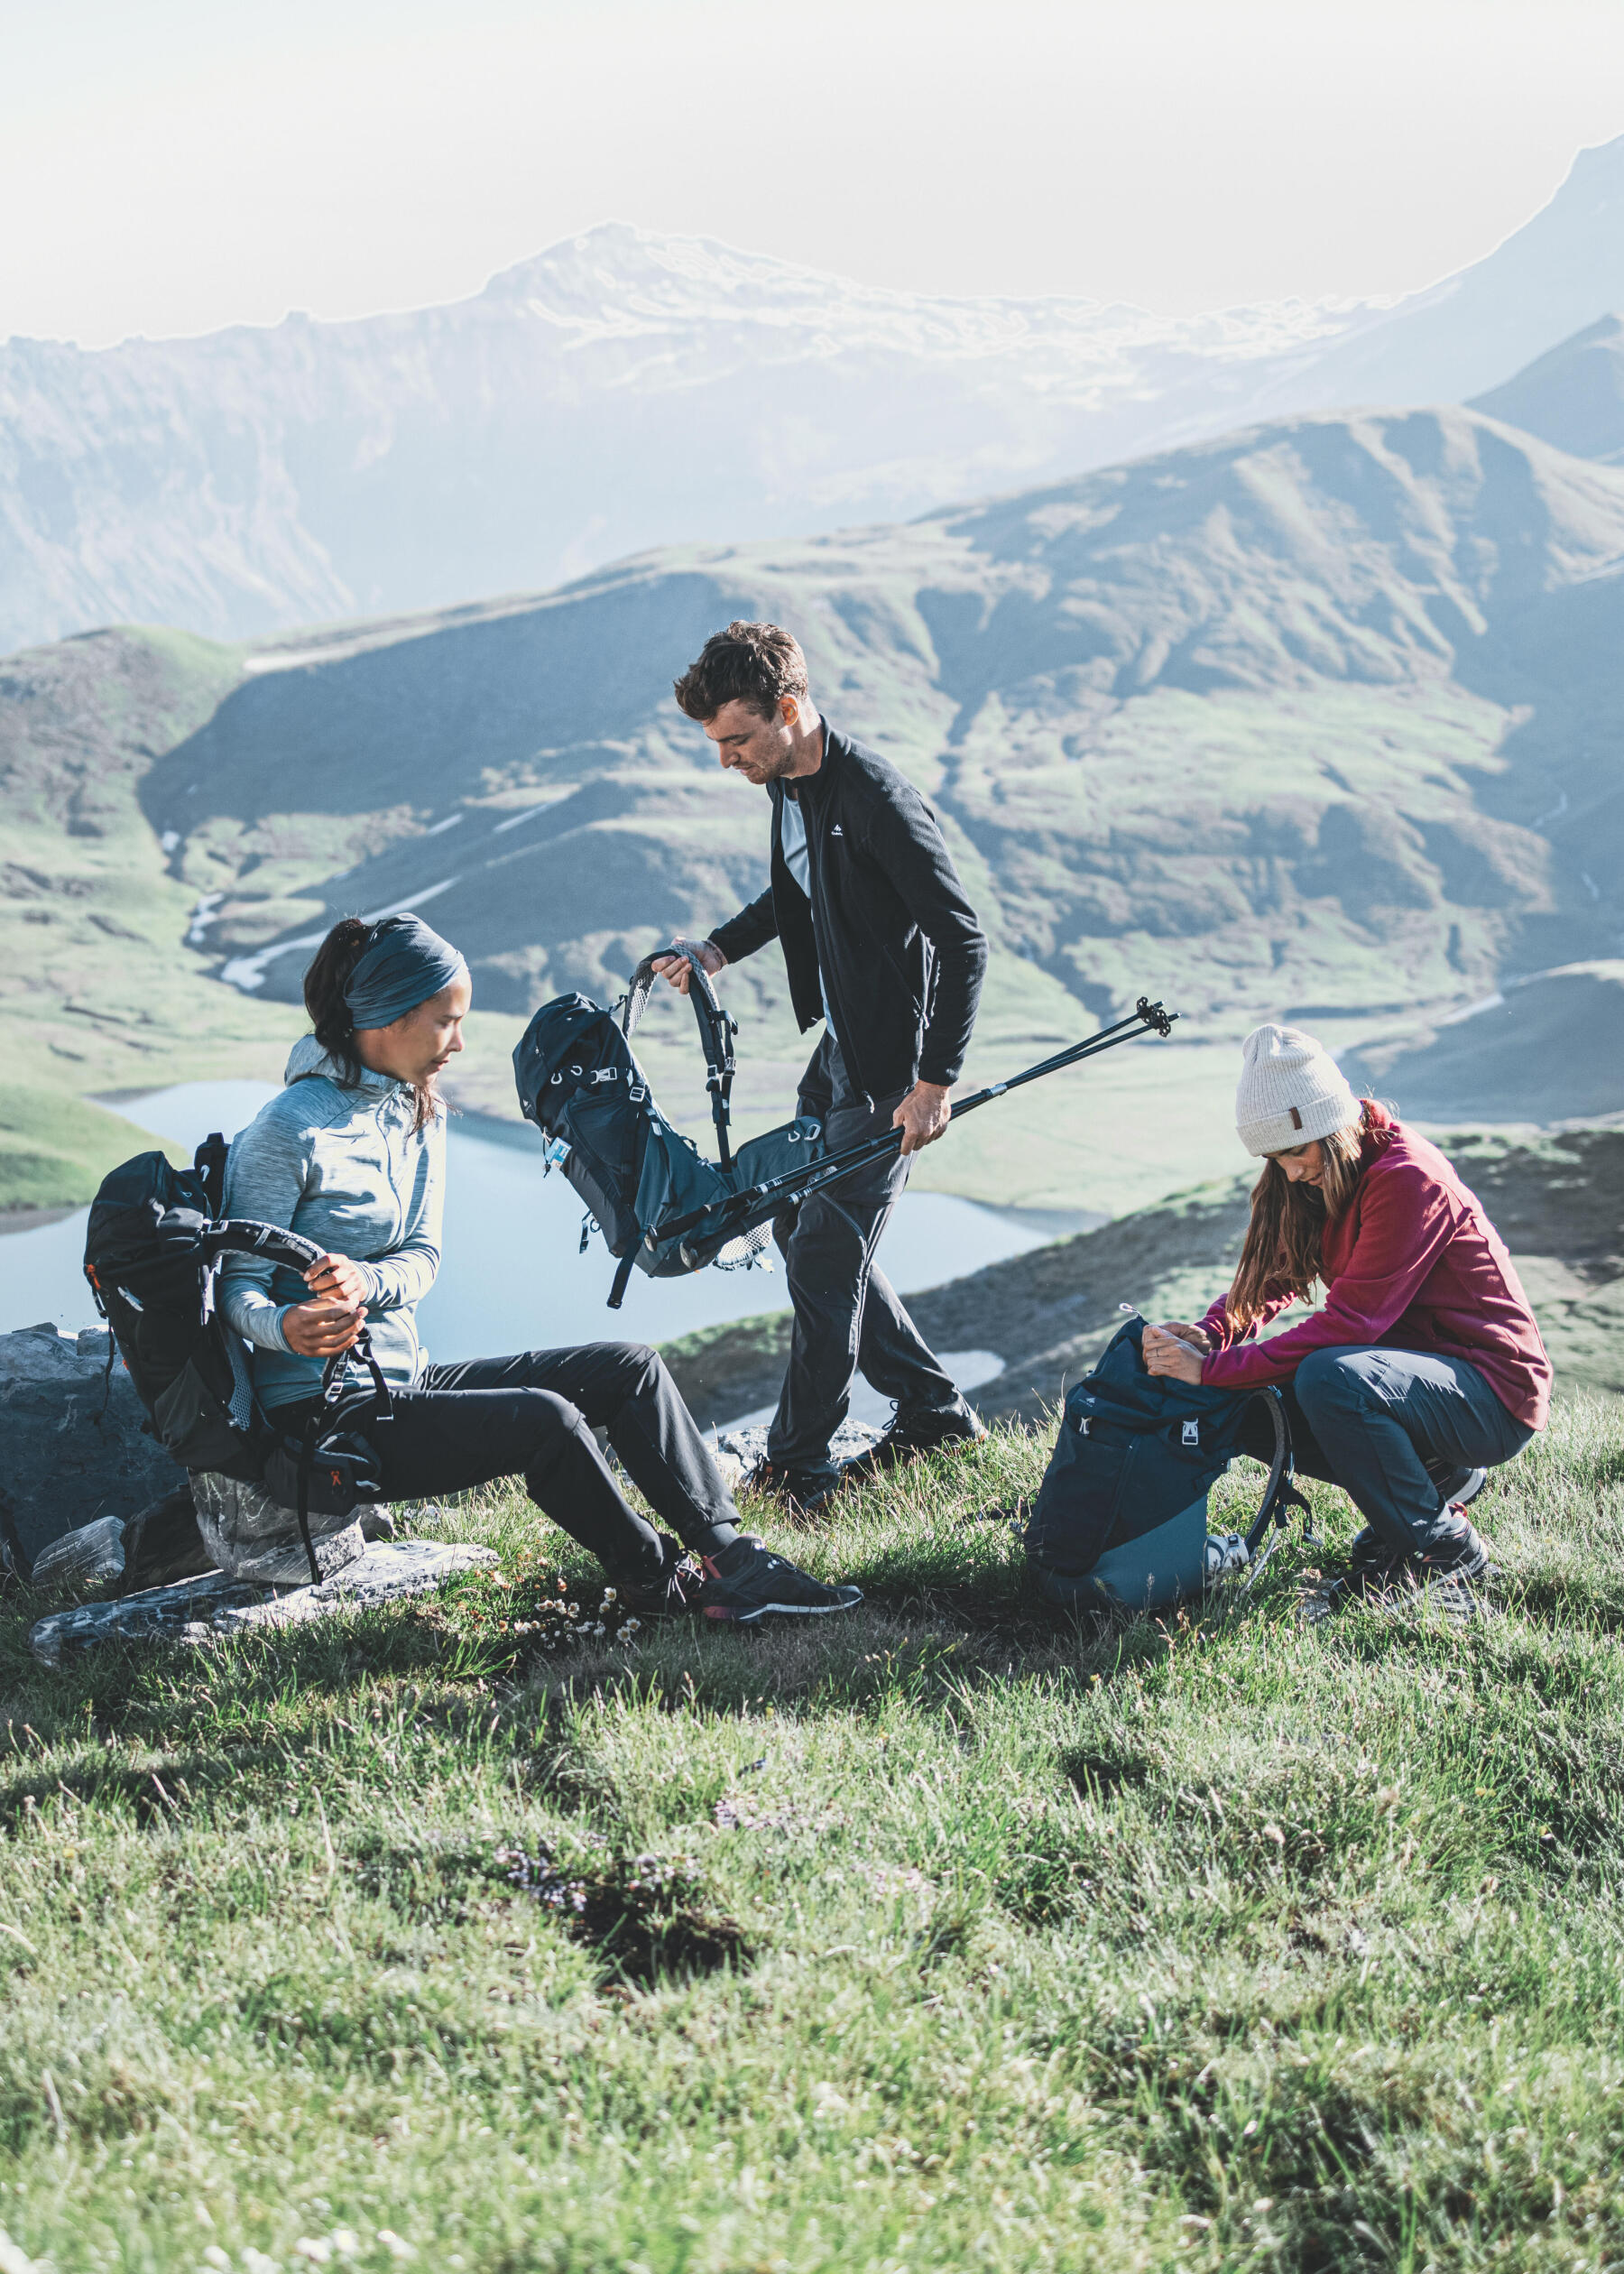 A complete guide on what to wear hiking UK